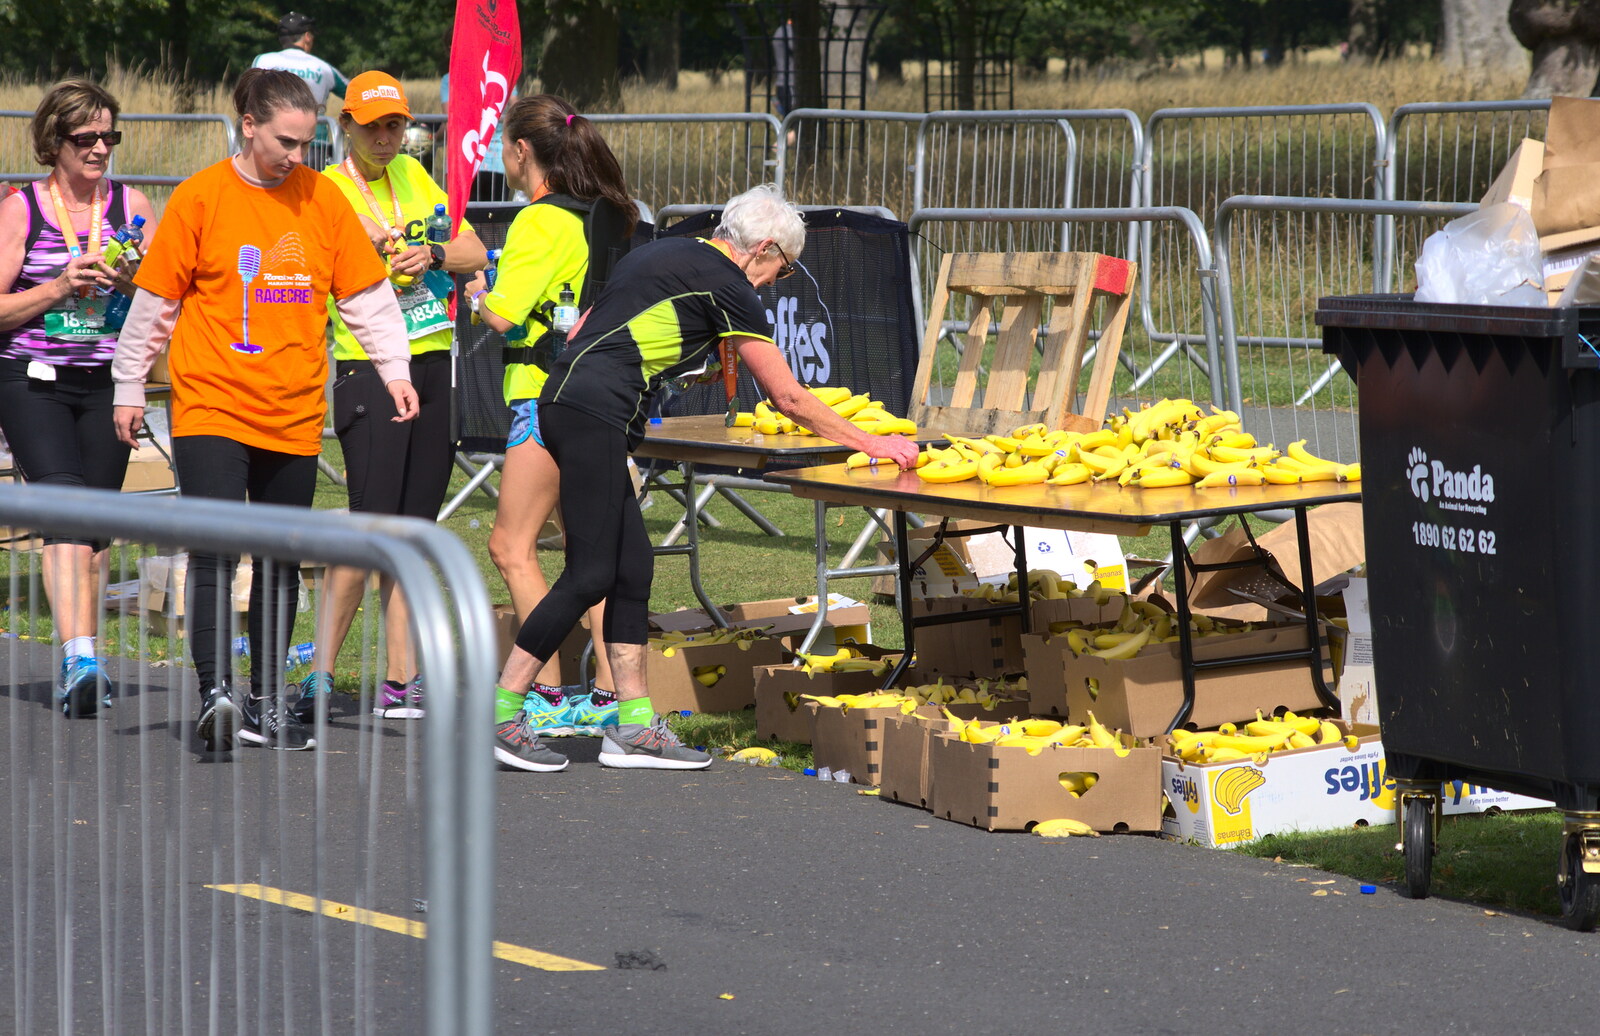 There are a thousand bananas for a post-run snack from Isobel's Rock'n'Roll Half Marathon, Dublin, Ireland - 13th August 2017